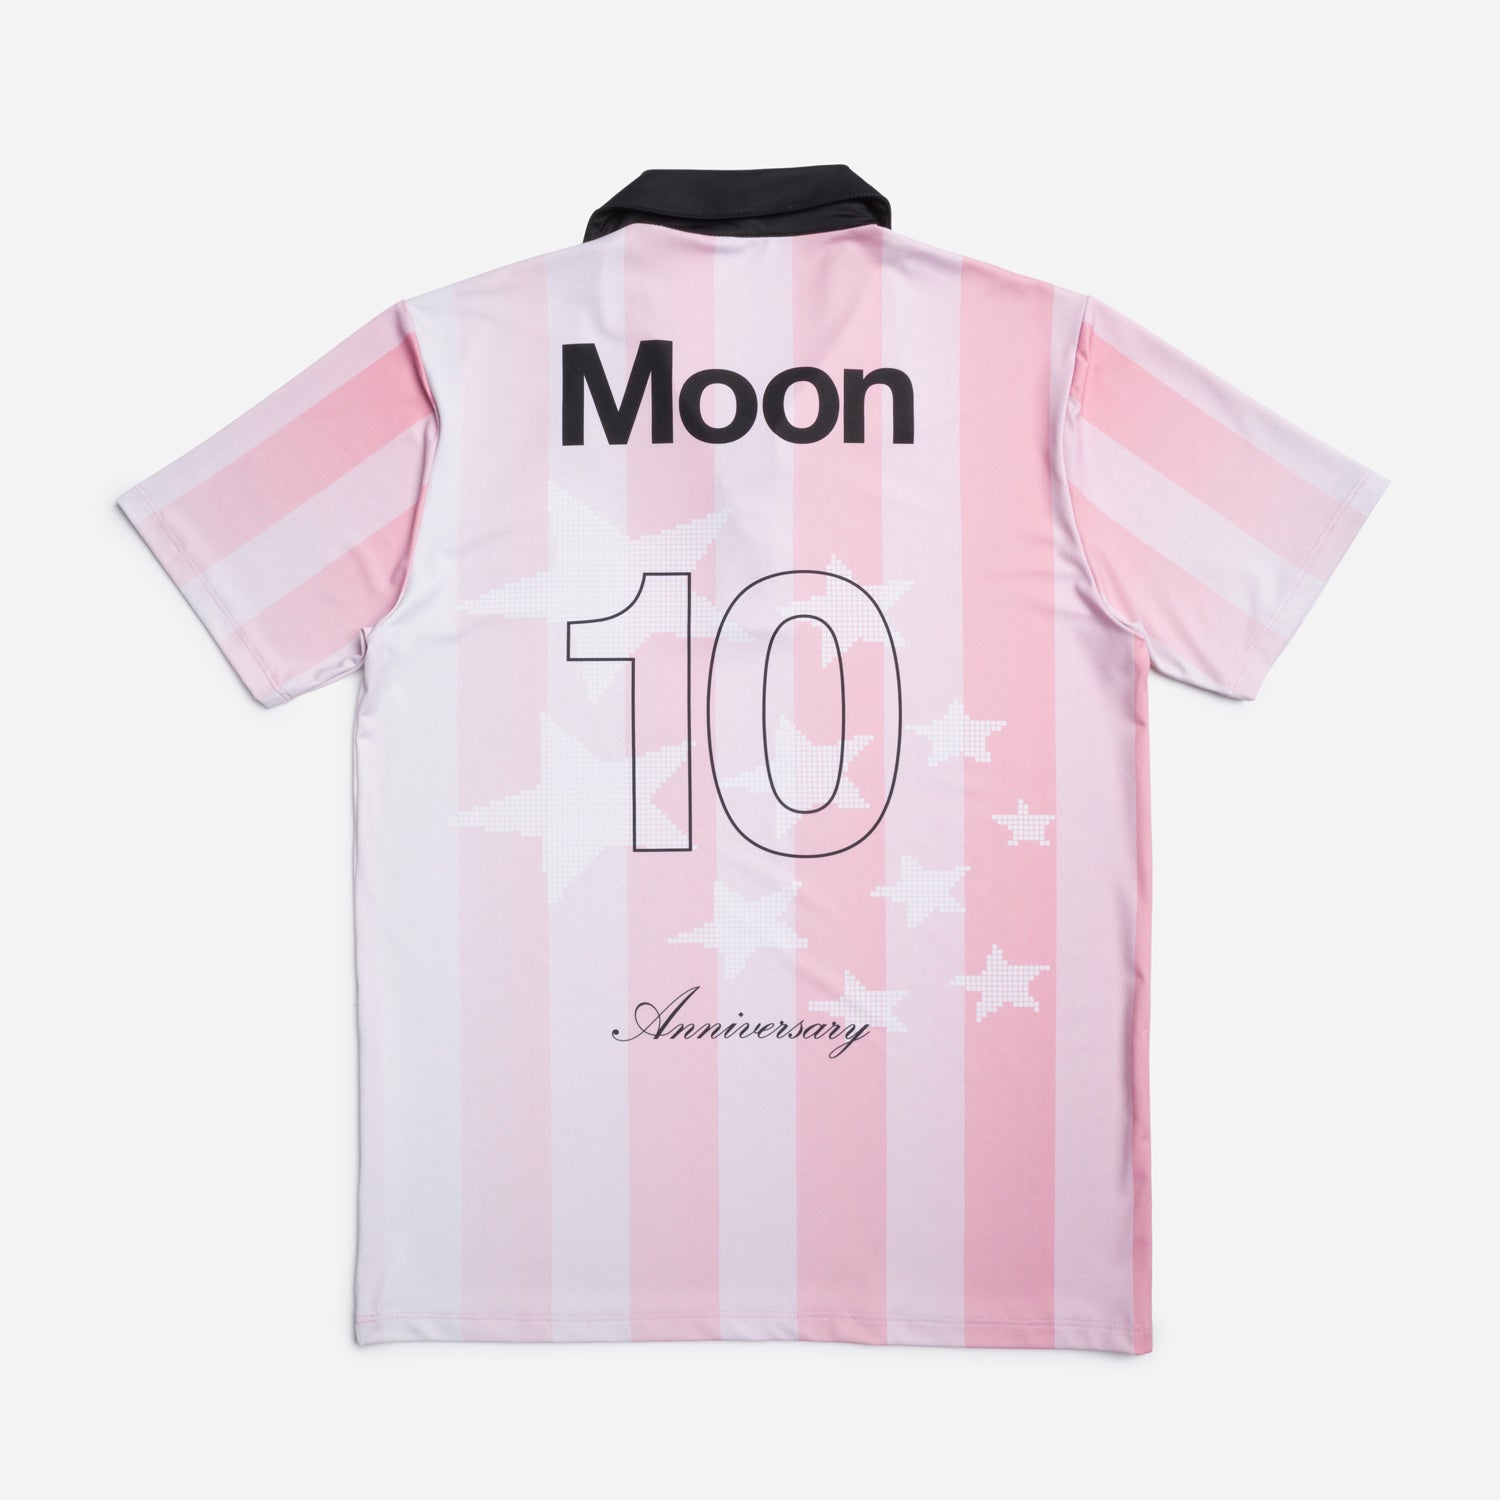 Le Champion Soccer Jersey